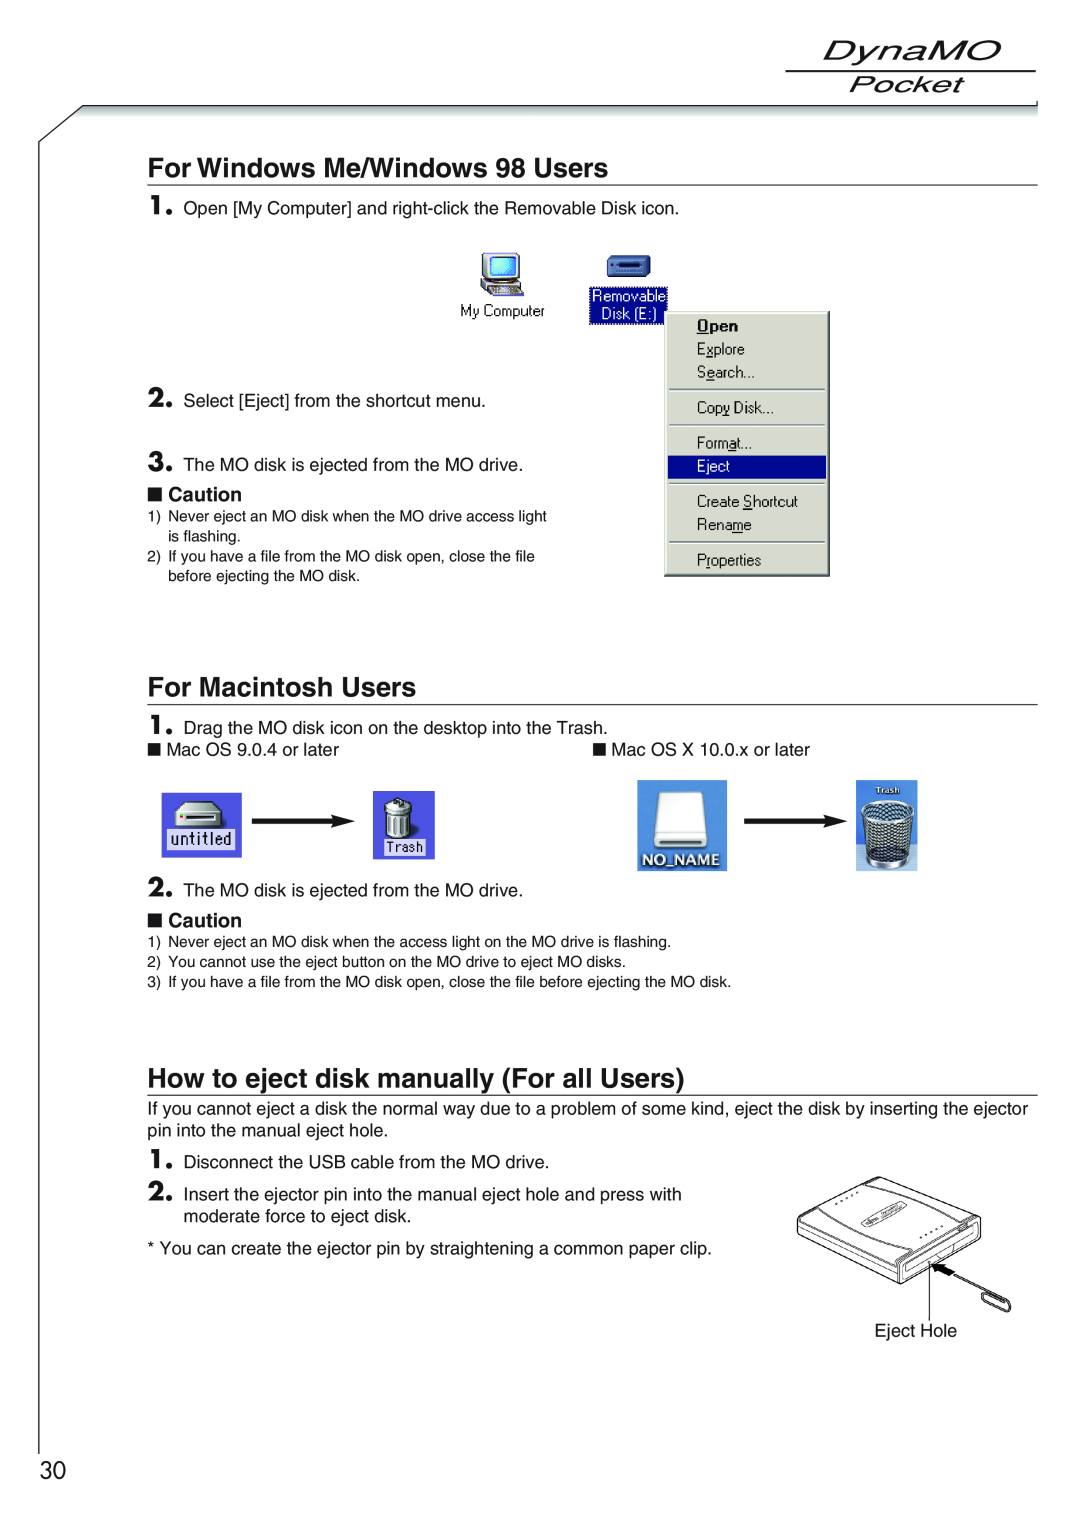 Fujitsu 1300U2 user manual For Windows Me/Windows 98 Users, For Macintosh Users, How to eject disk manually For all Users 